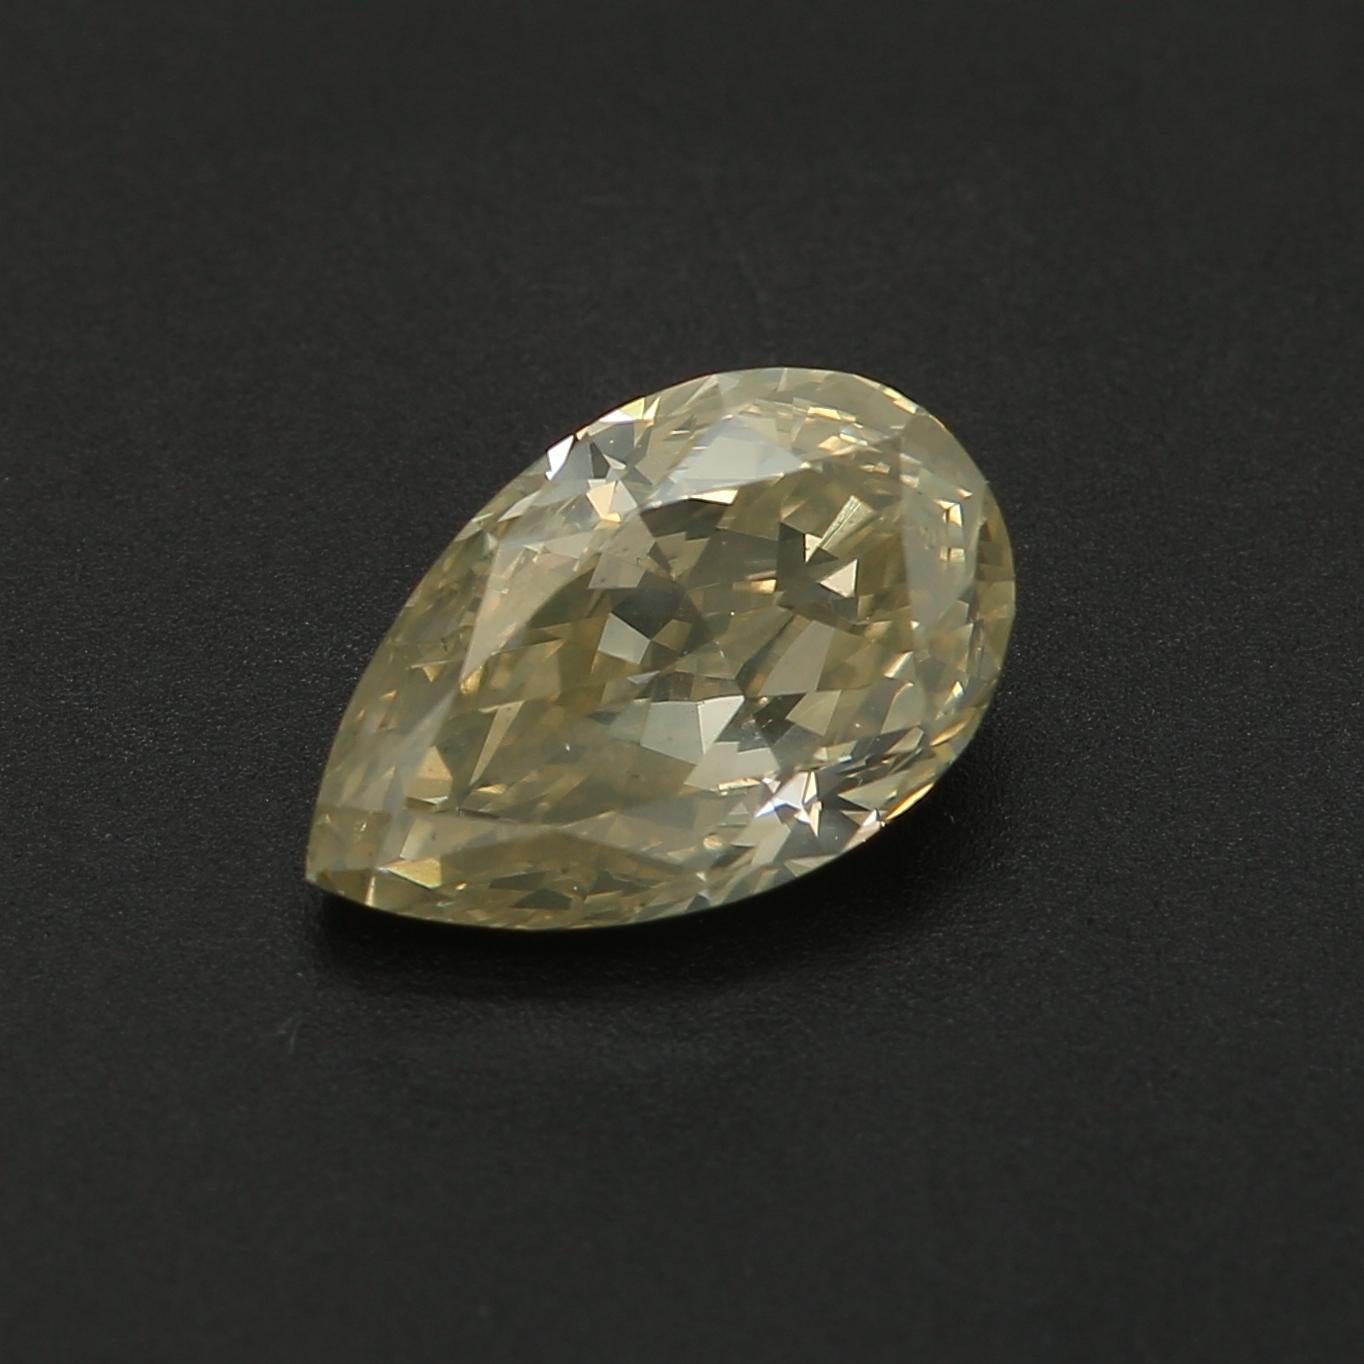 ***100% NATURAL FANCY COLOUR DIAMOND***

✪ Diamond Details ✪

➛ Shape: Pear
➛ Colour Grade: Q-R
➛ Carat: 1.04
➛ Clarity: SI1
➛ IGI Certified 

^FEATURES OF THE DIAMOND^

This diamond weighs 1.04 carats, indicating its size and mass. It's pear shape,